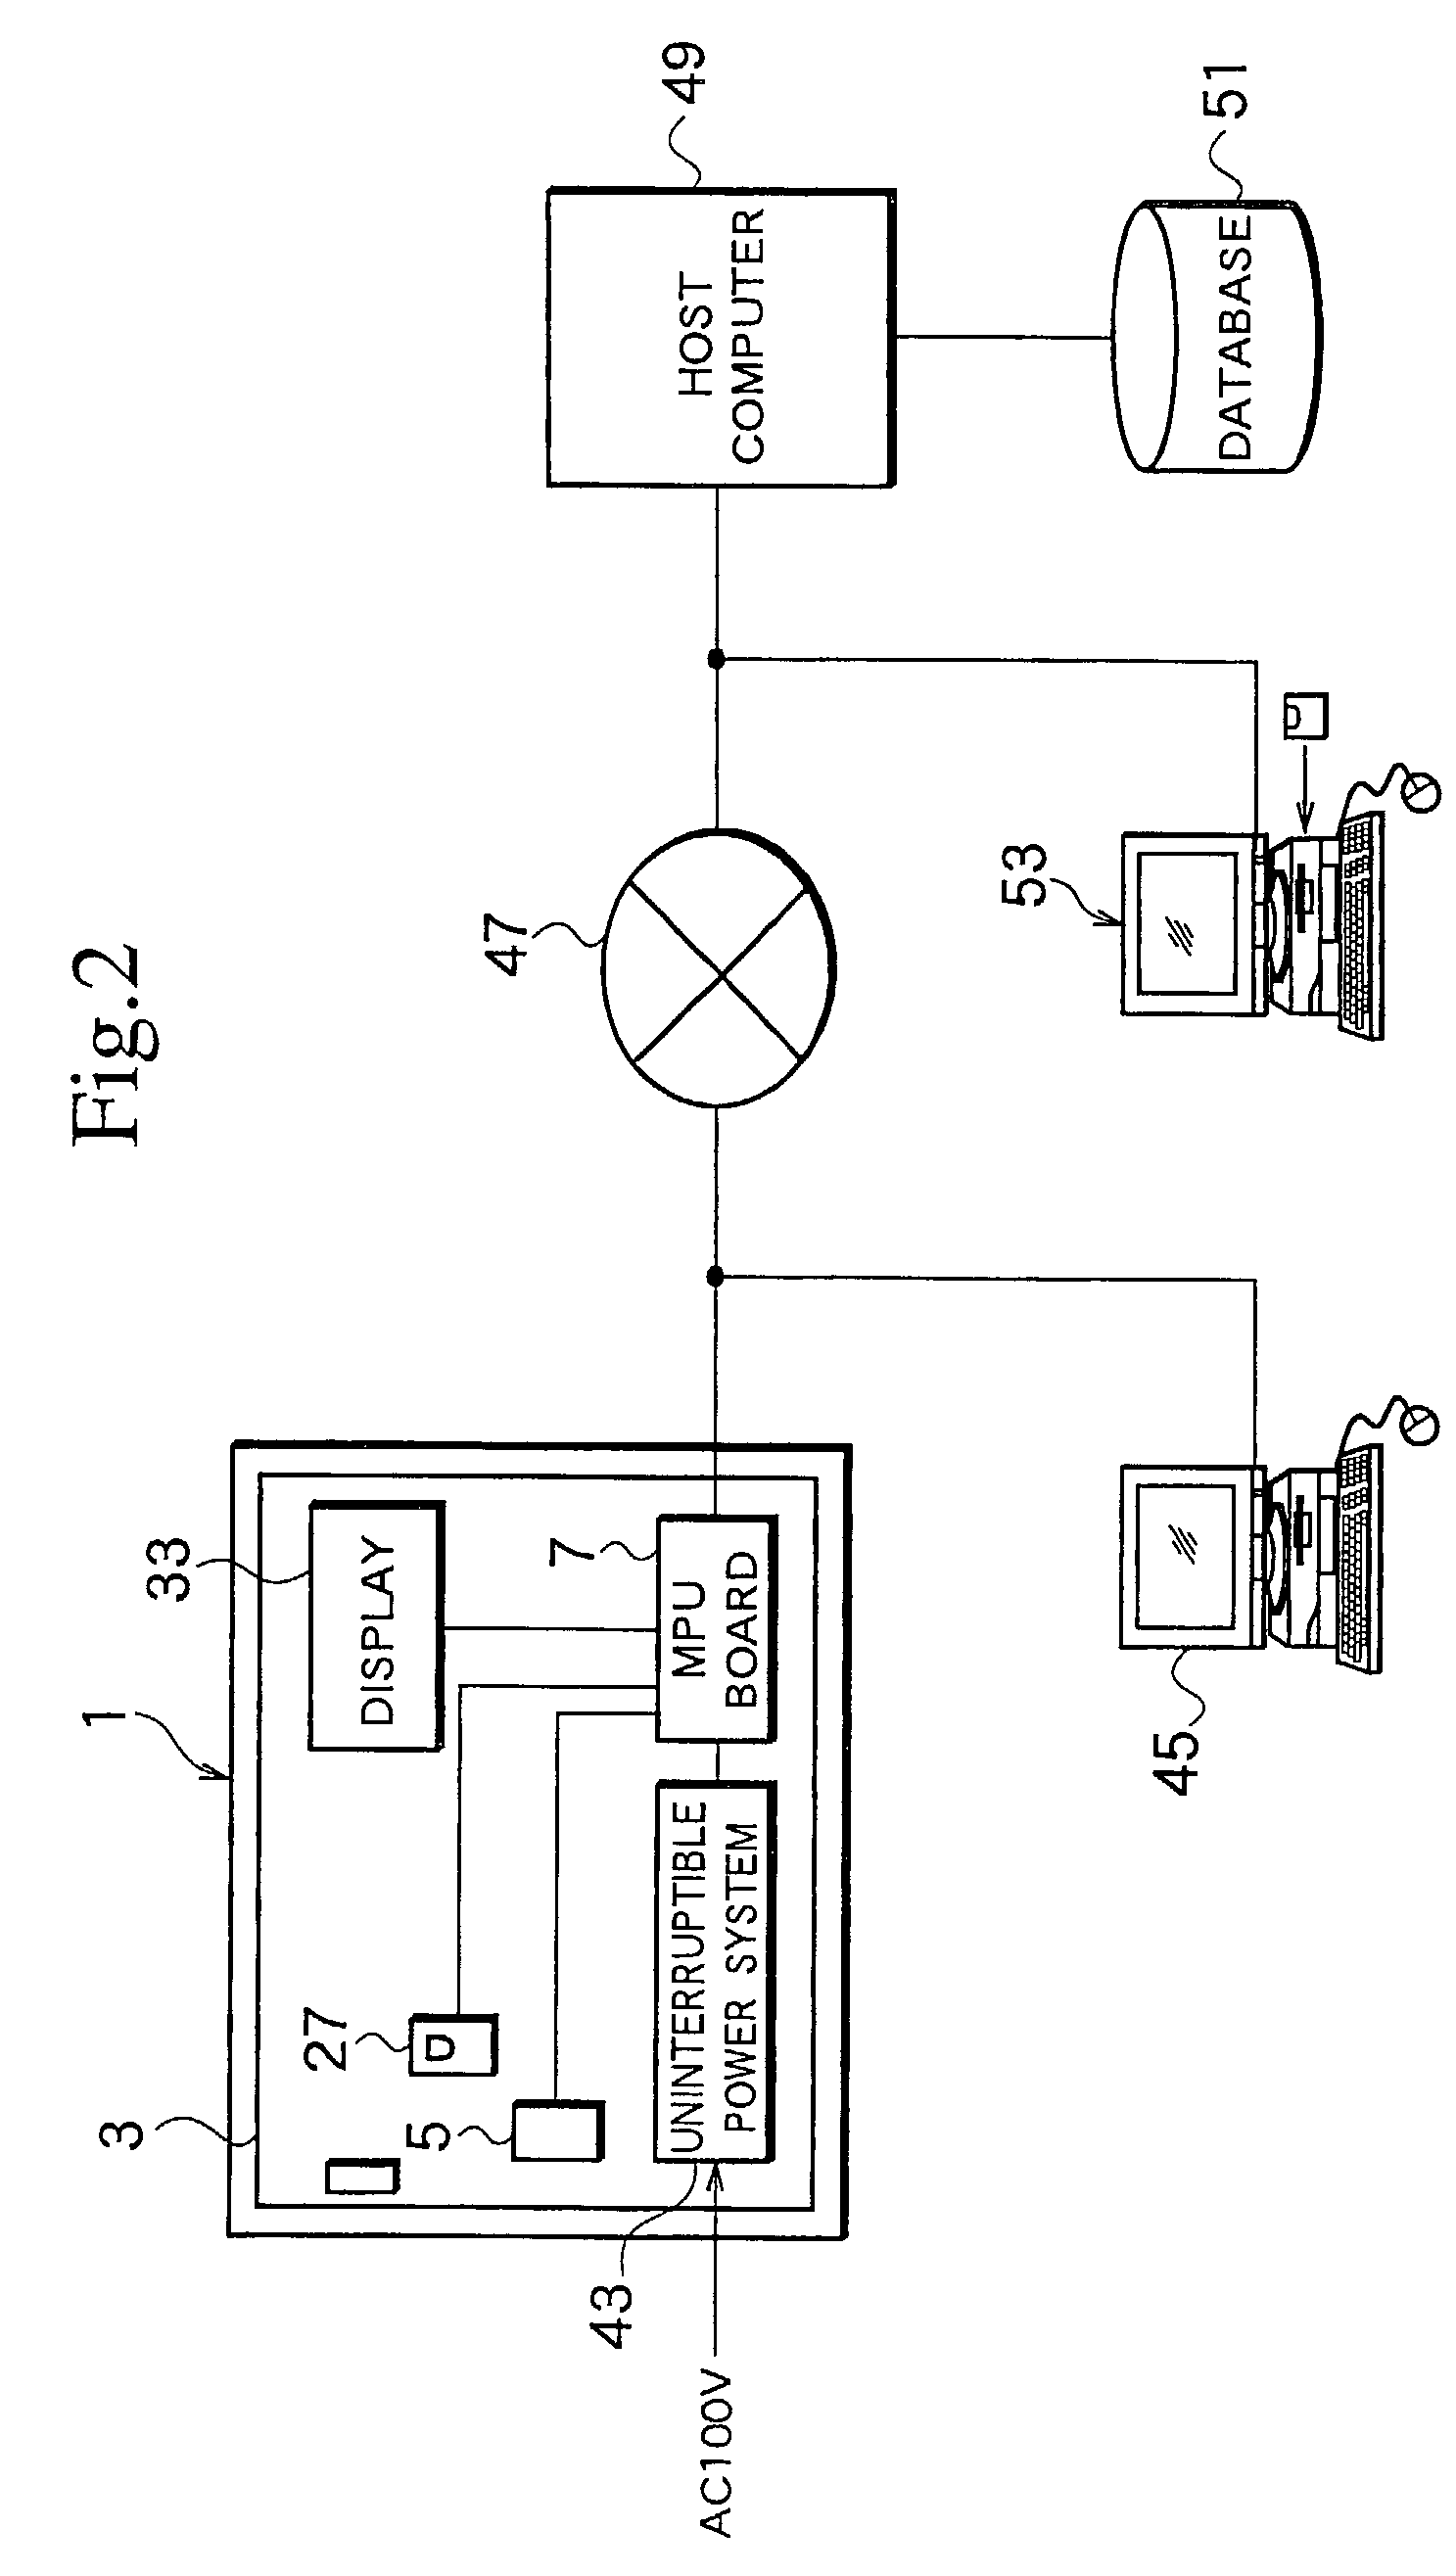 Apparatus for controlling articles in custody